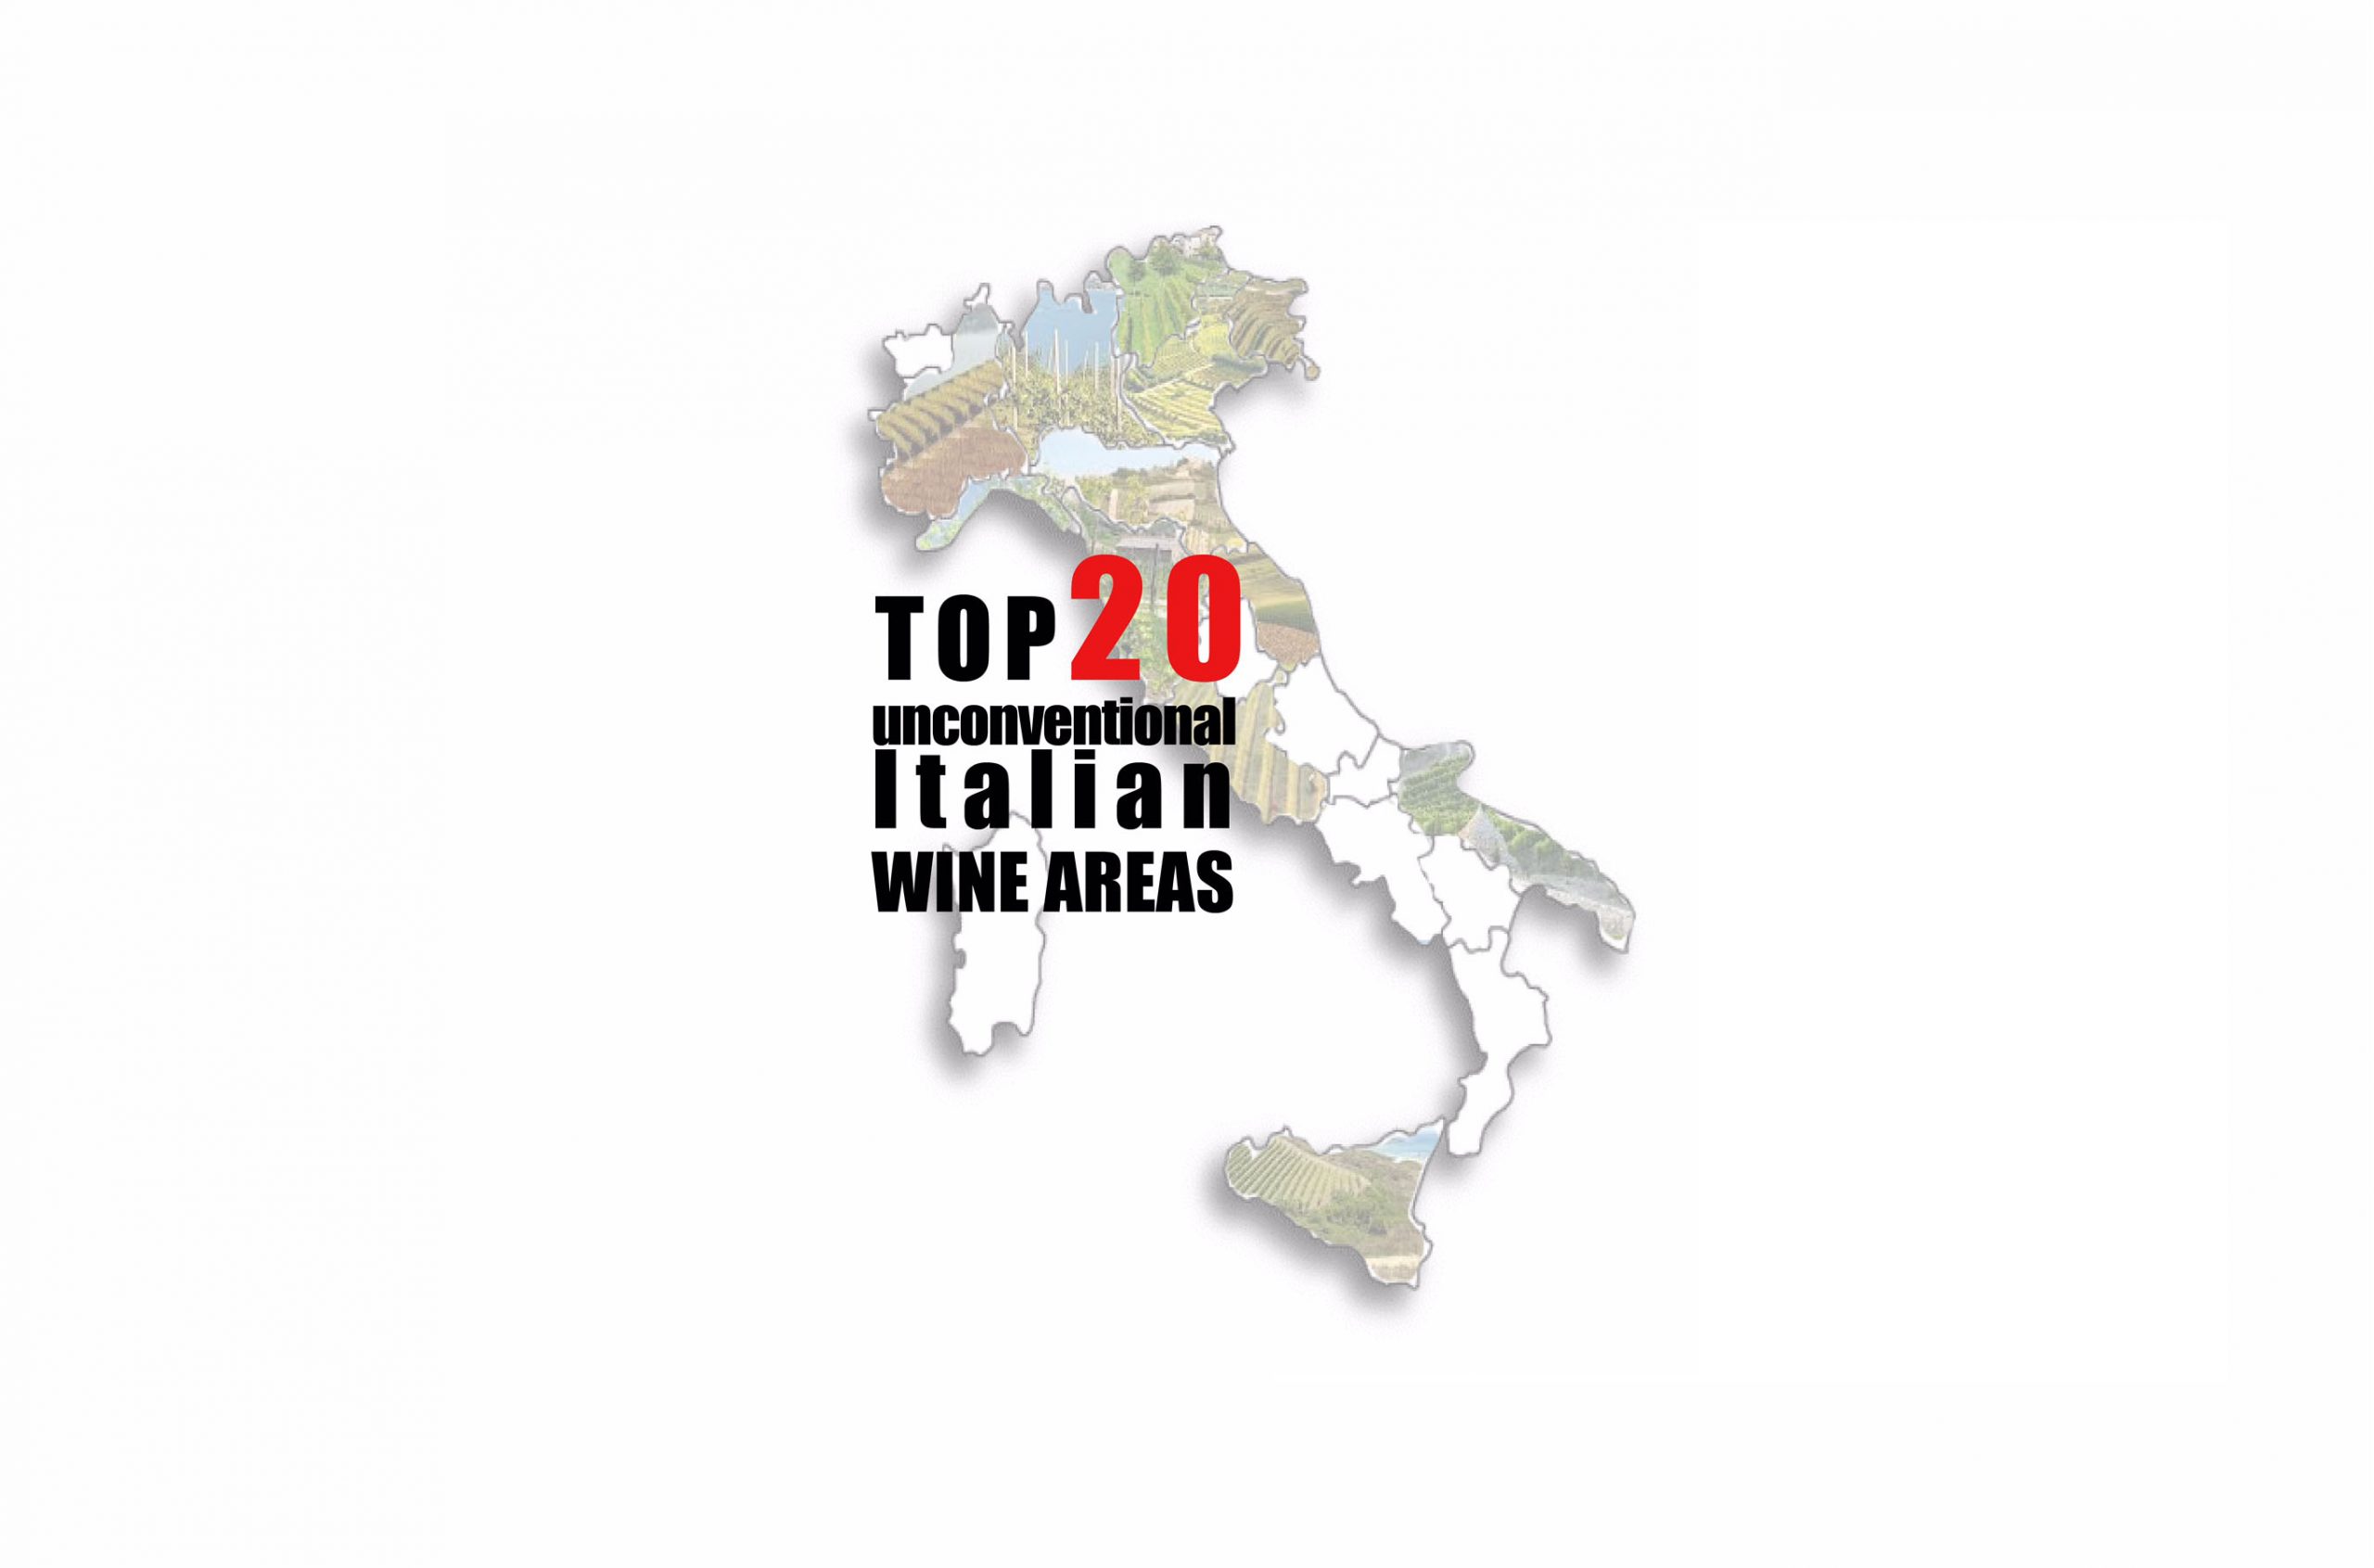 The Best 20 Unconventional Italian Wine Areas.